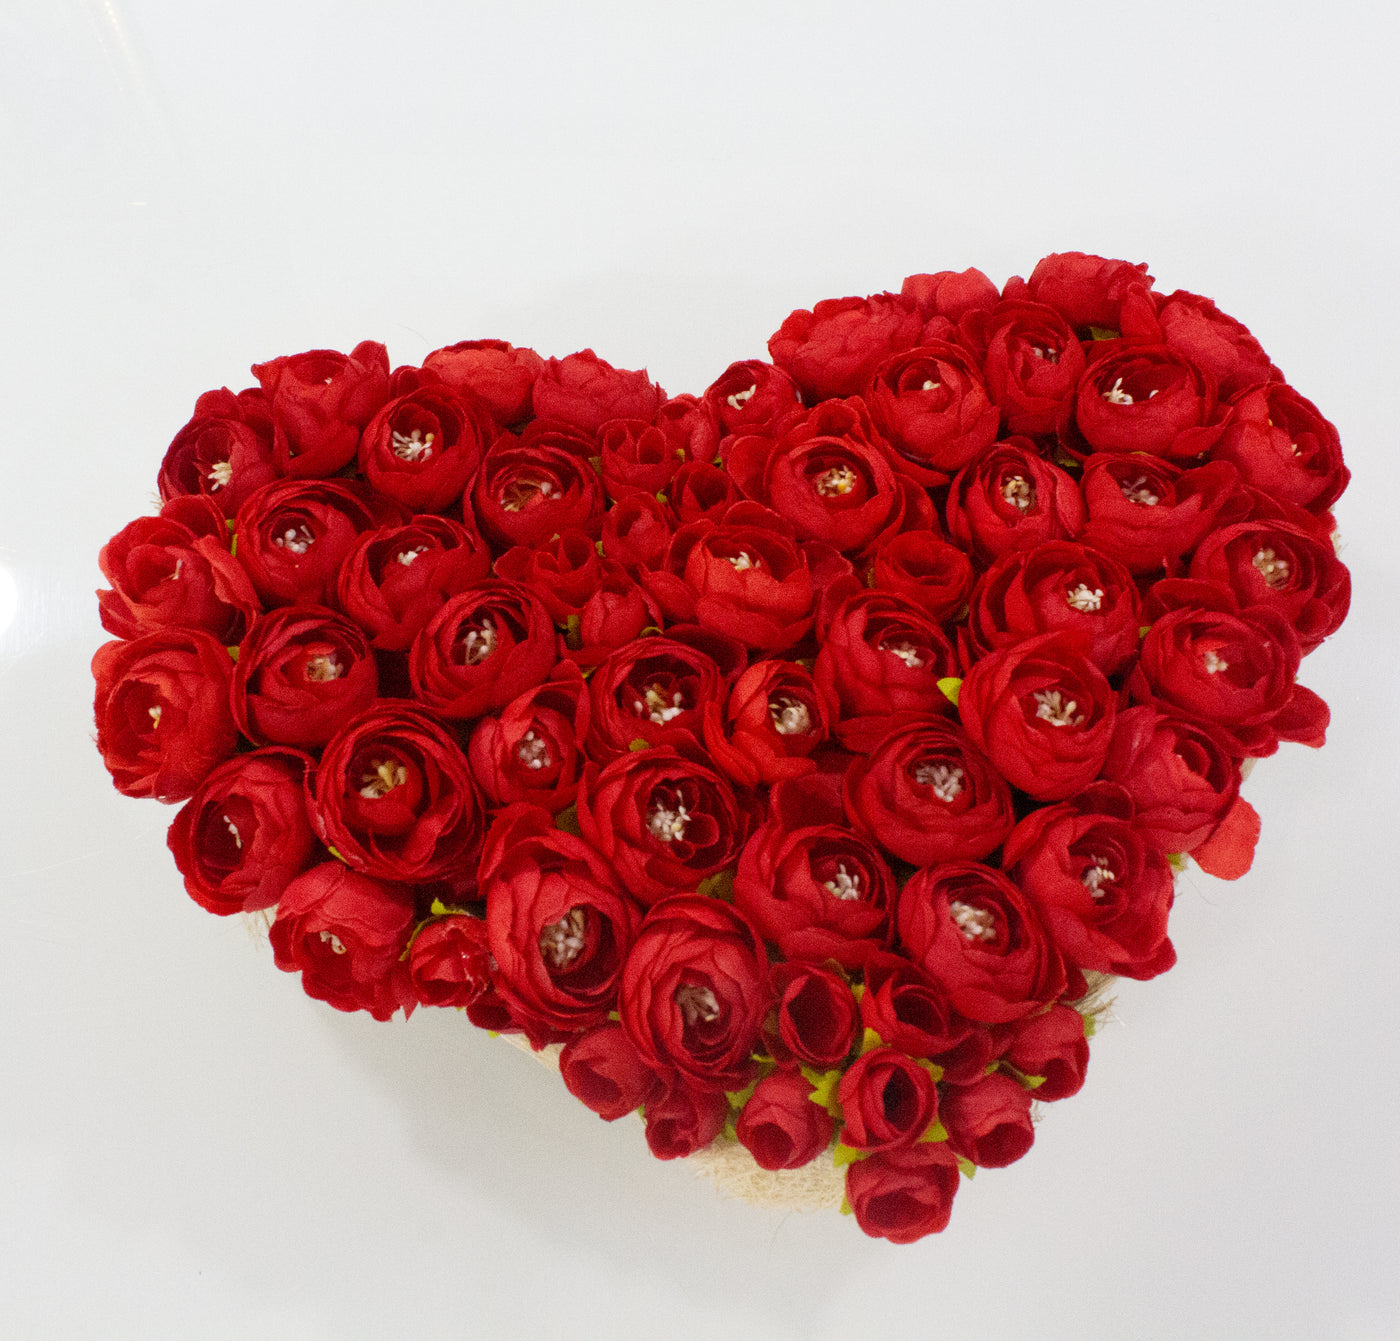 PolliNation Red Roses Heart Shape Bouquet For Valentine Gift